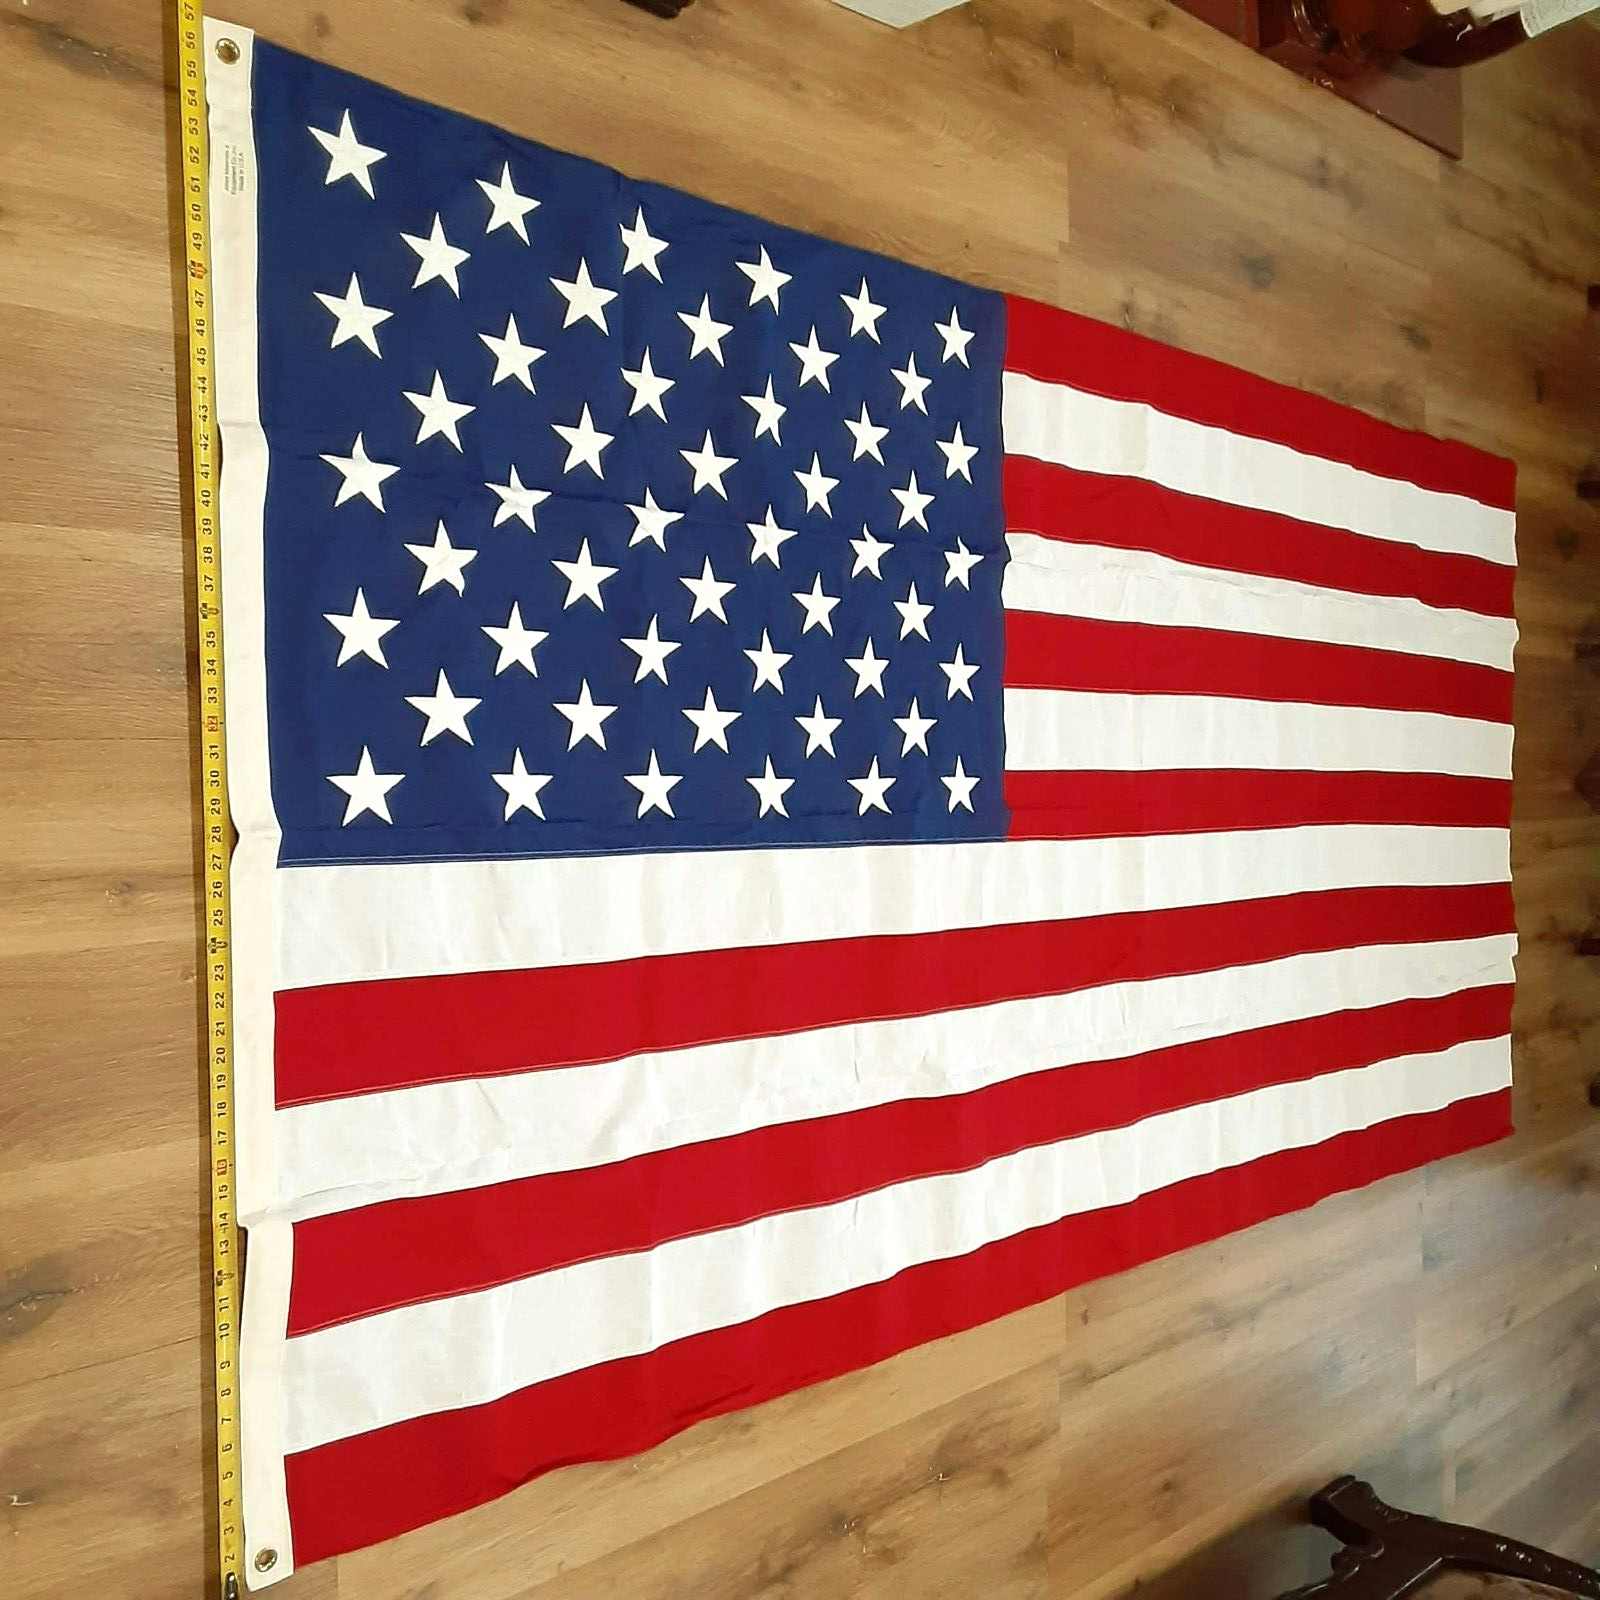 50 Star American Burial Memorial Flag Allied Materials Made In U.S.A. Vintage